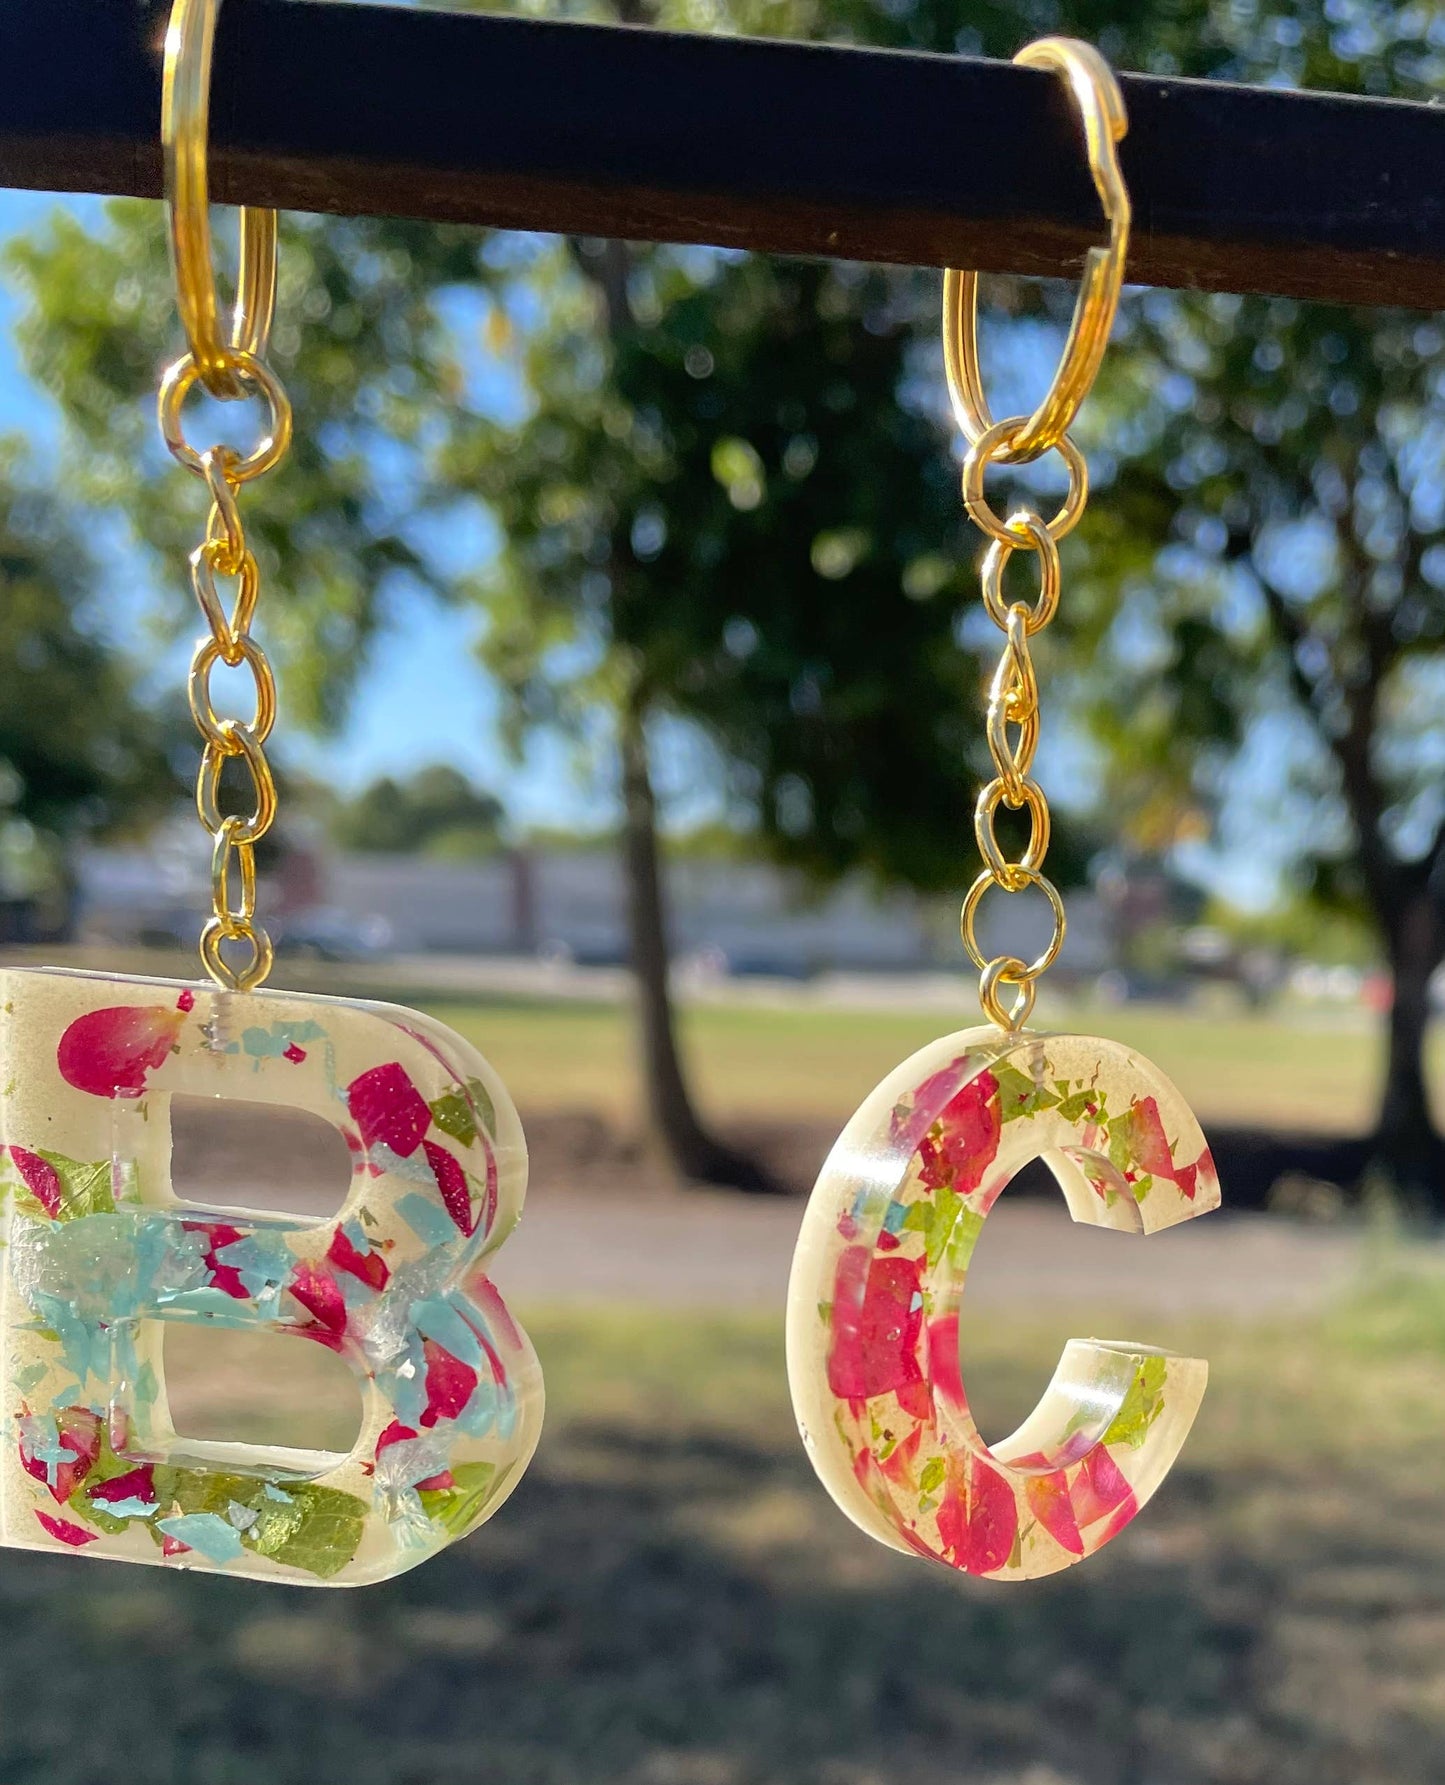 Personalized Floral Confetti Initial Keychains Resin